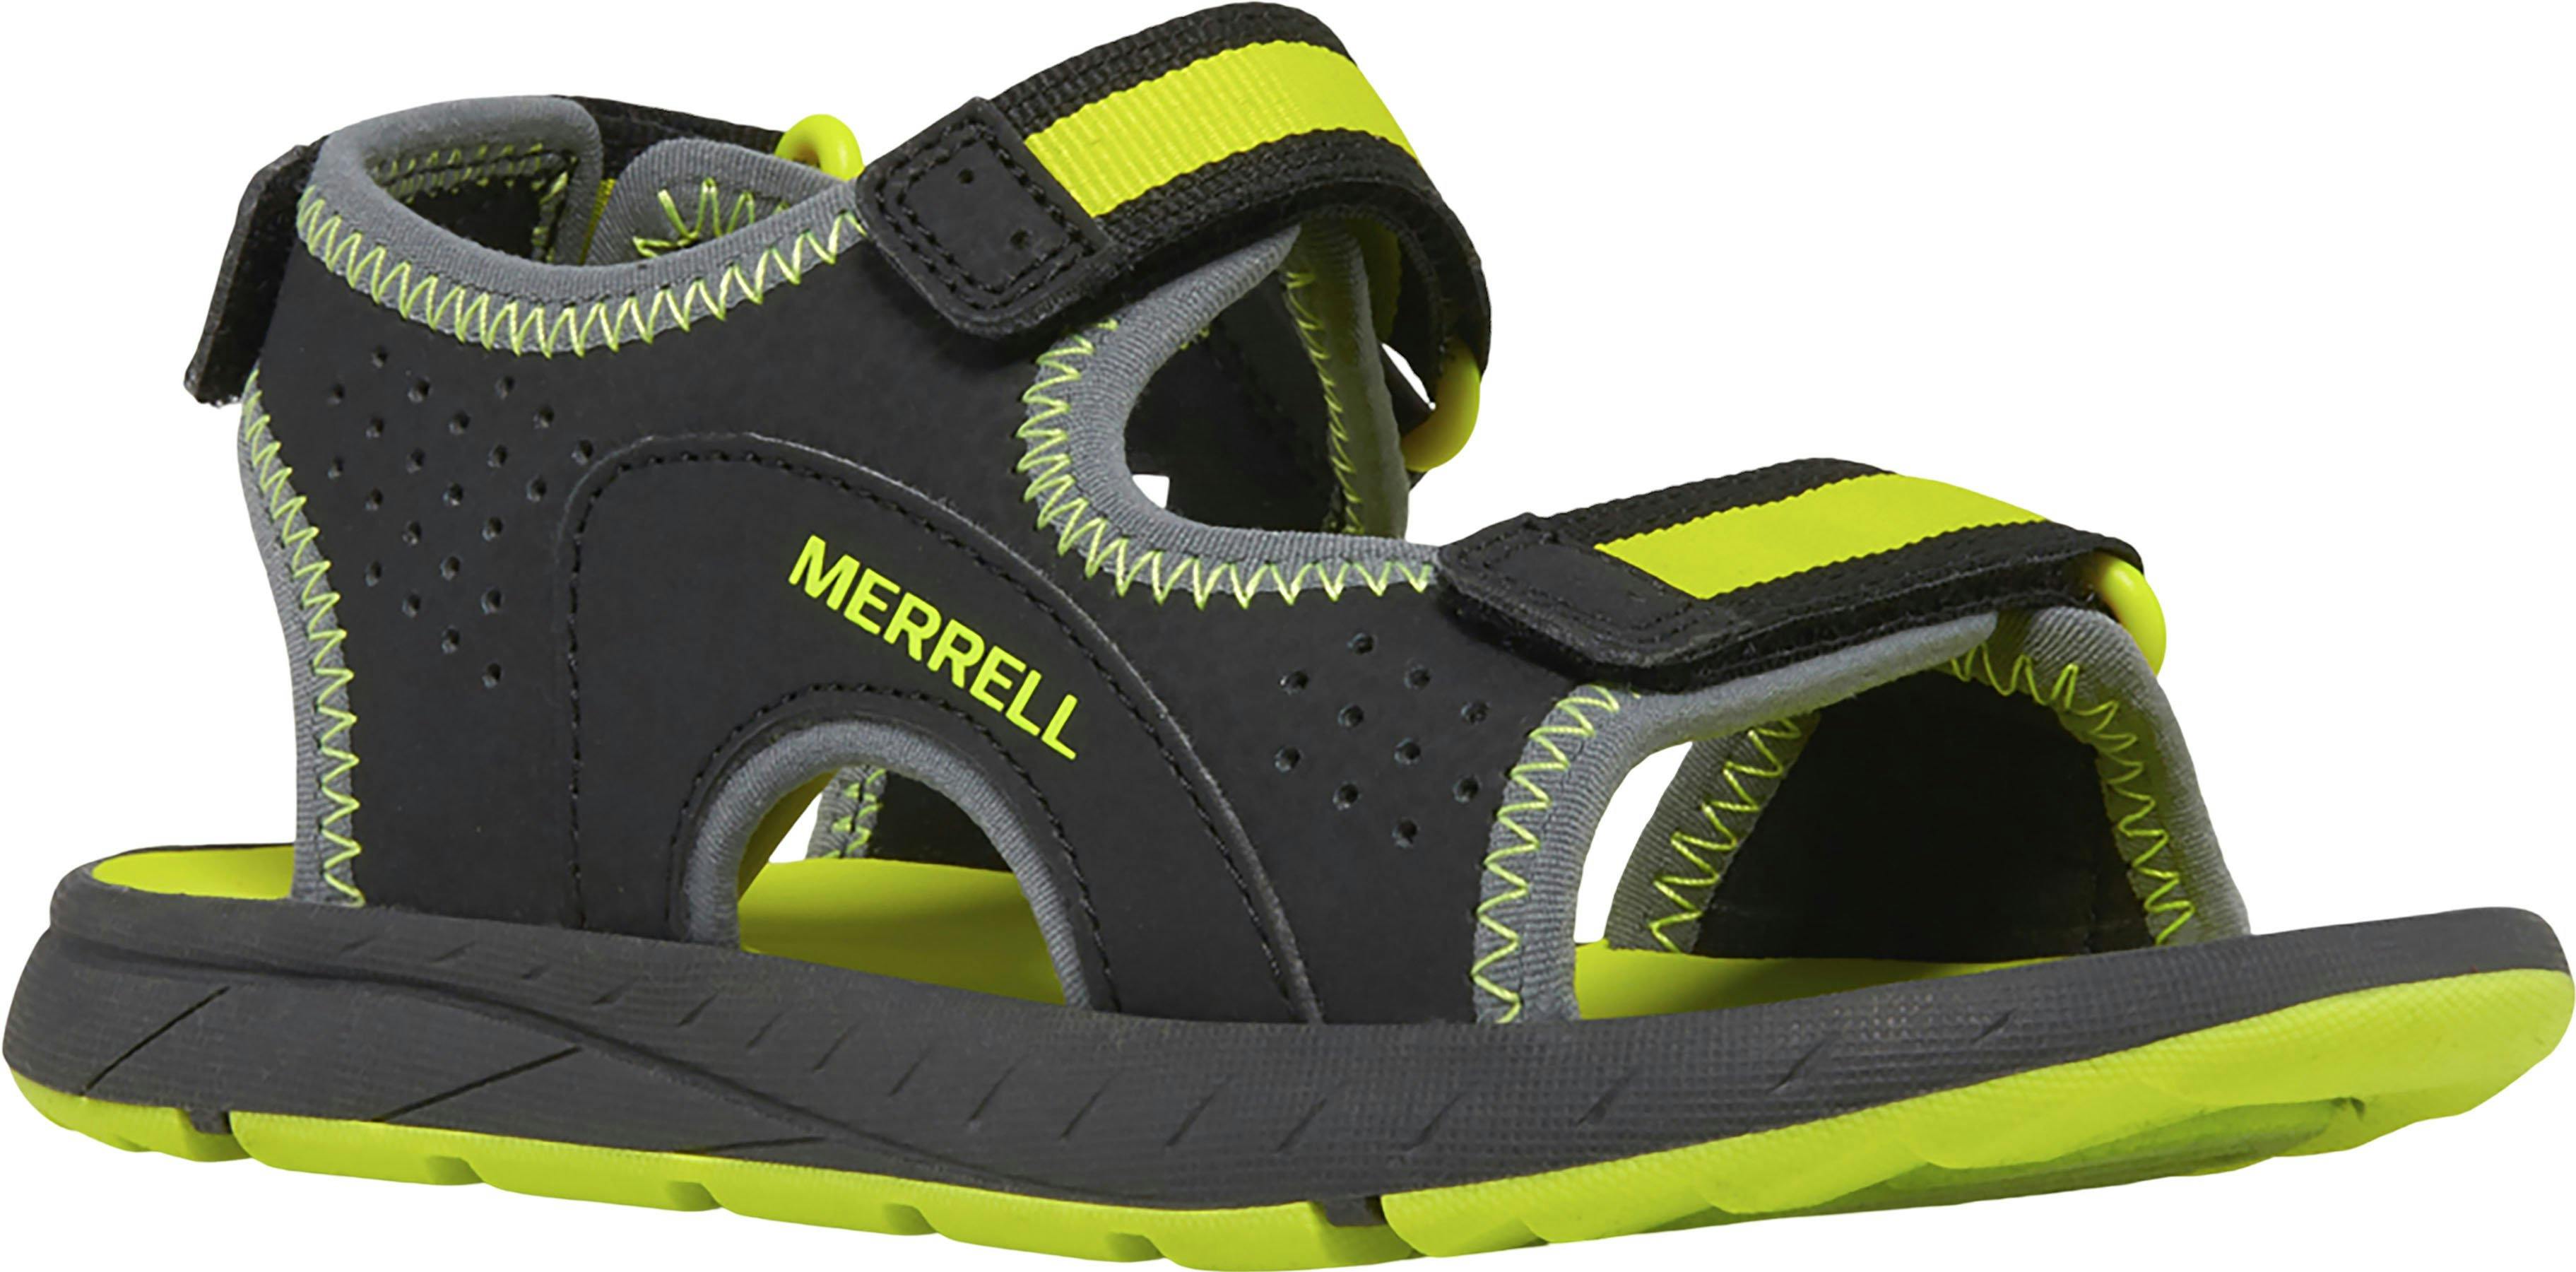 Product image for Panther 3.0 Sandals - Big Boys